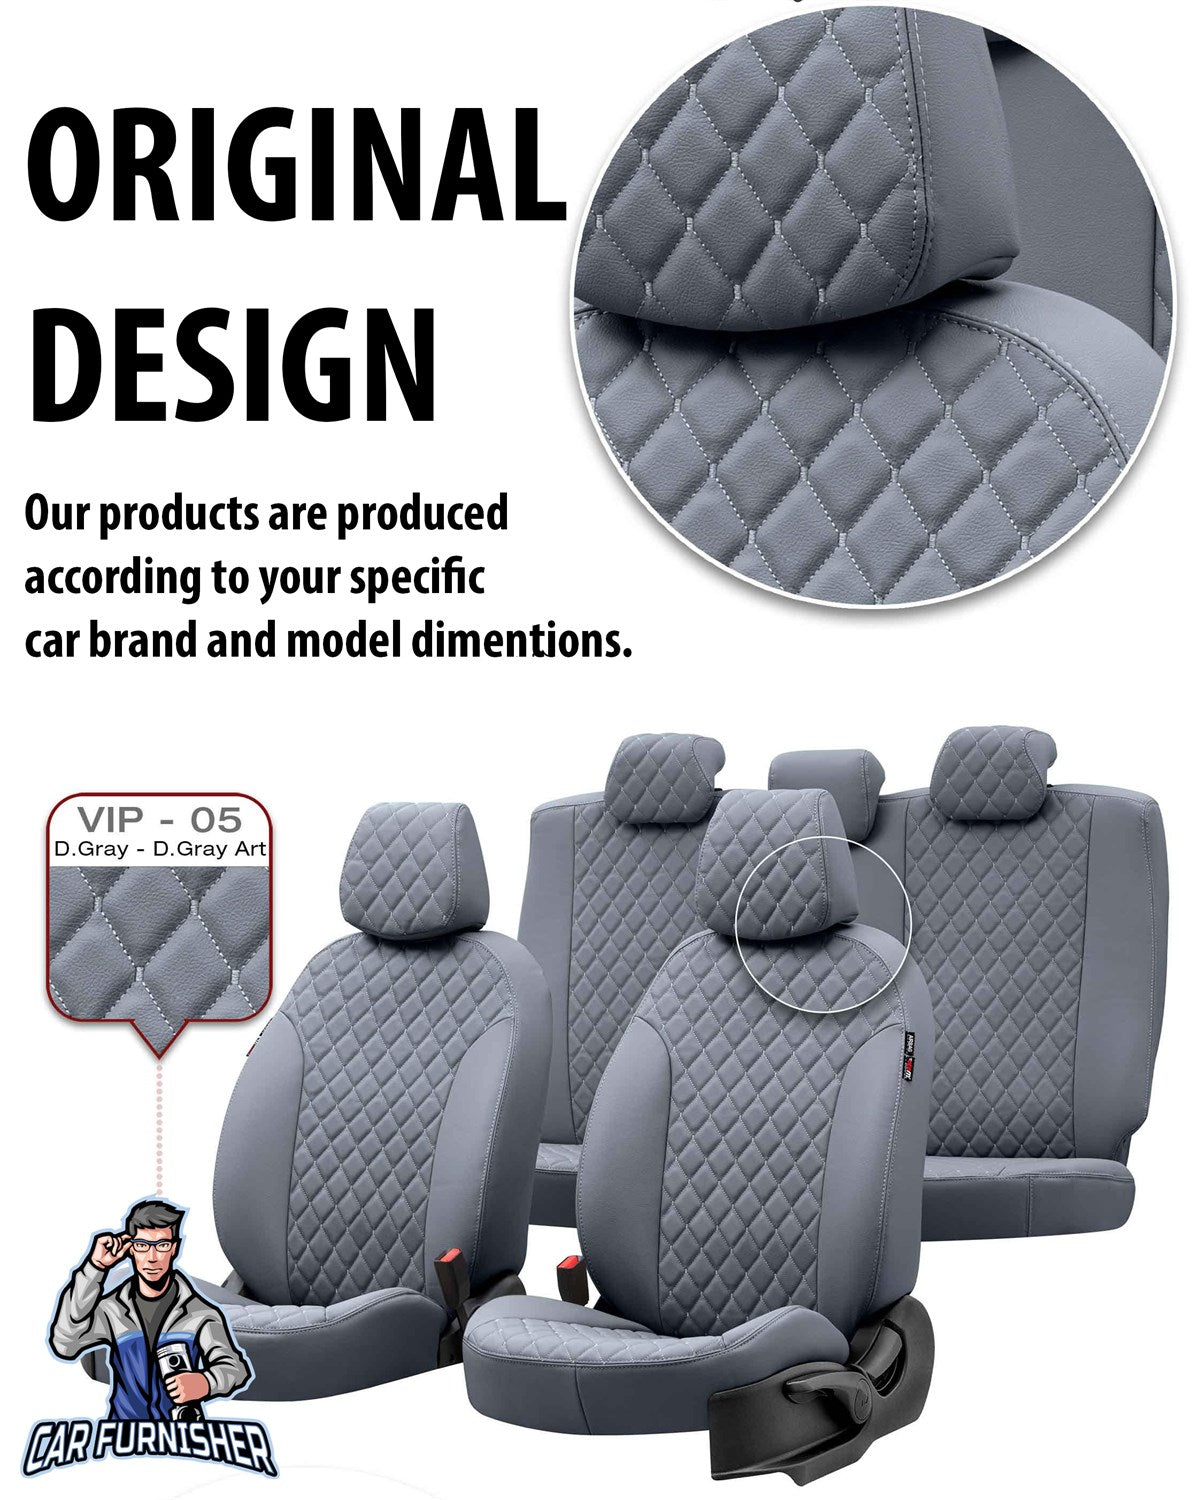 Volkswagen Touareg Seat Cover Madrid Leather Design Blue Leather